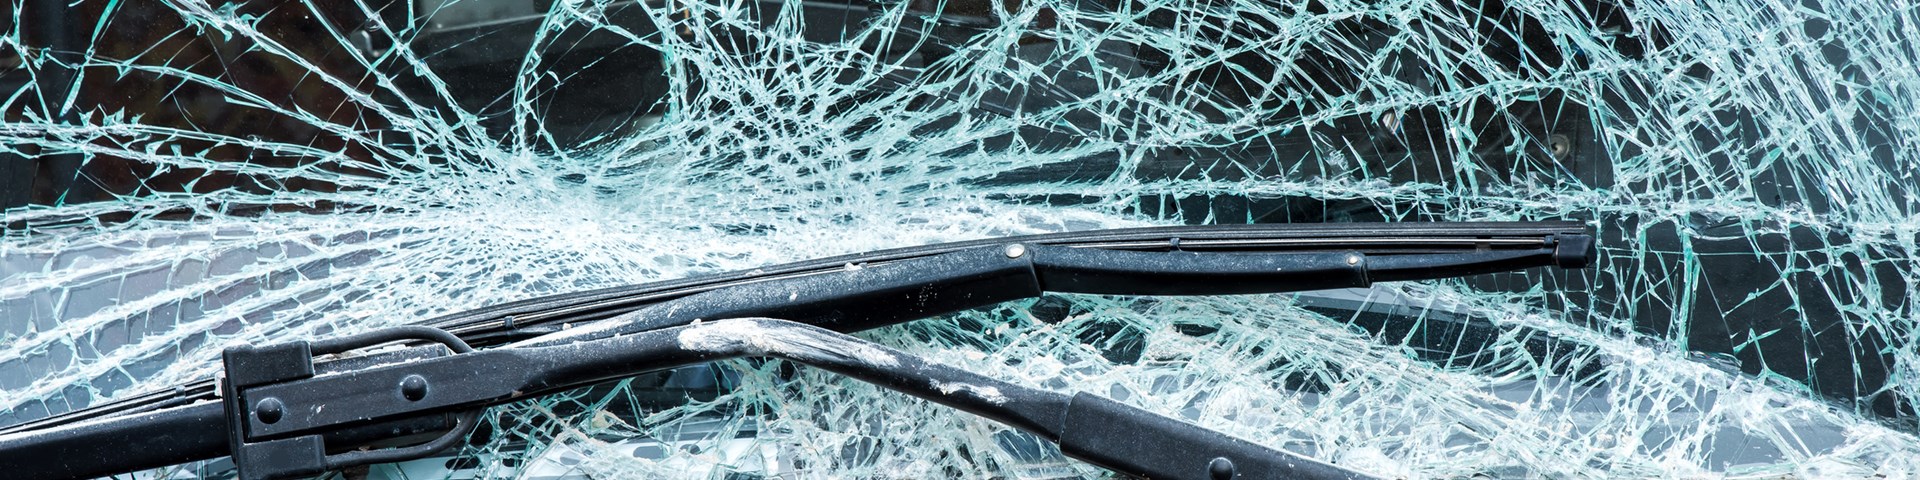 Bus windscreen smashed after vehicle accident